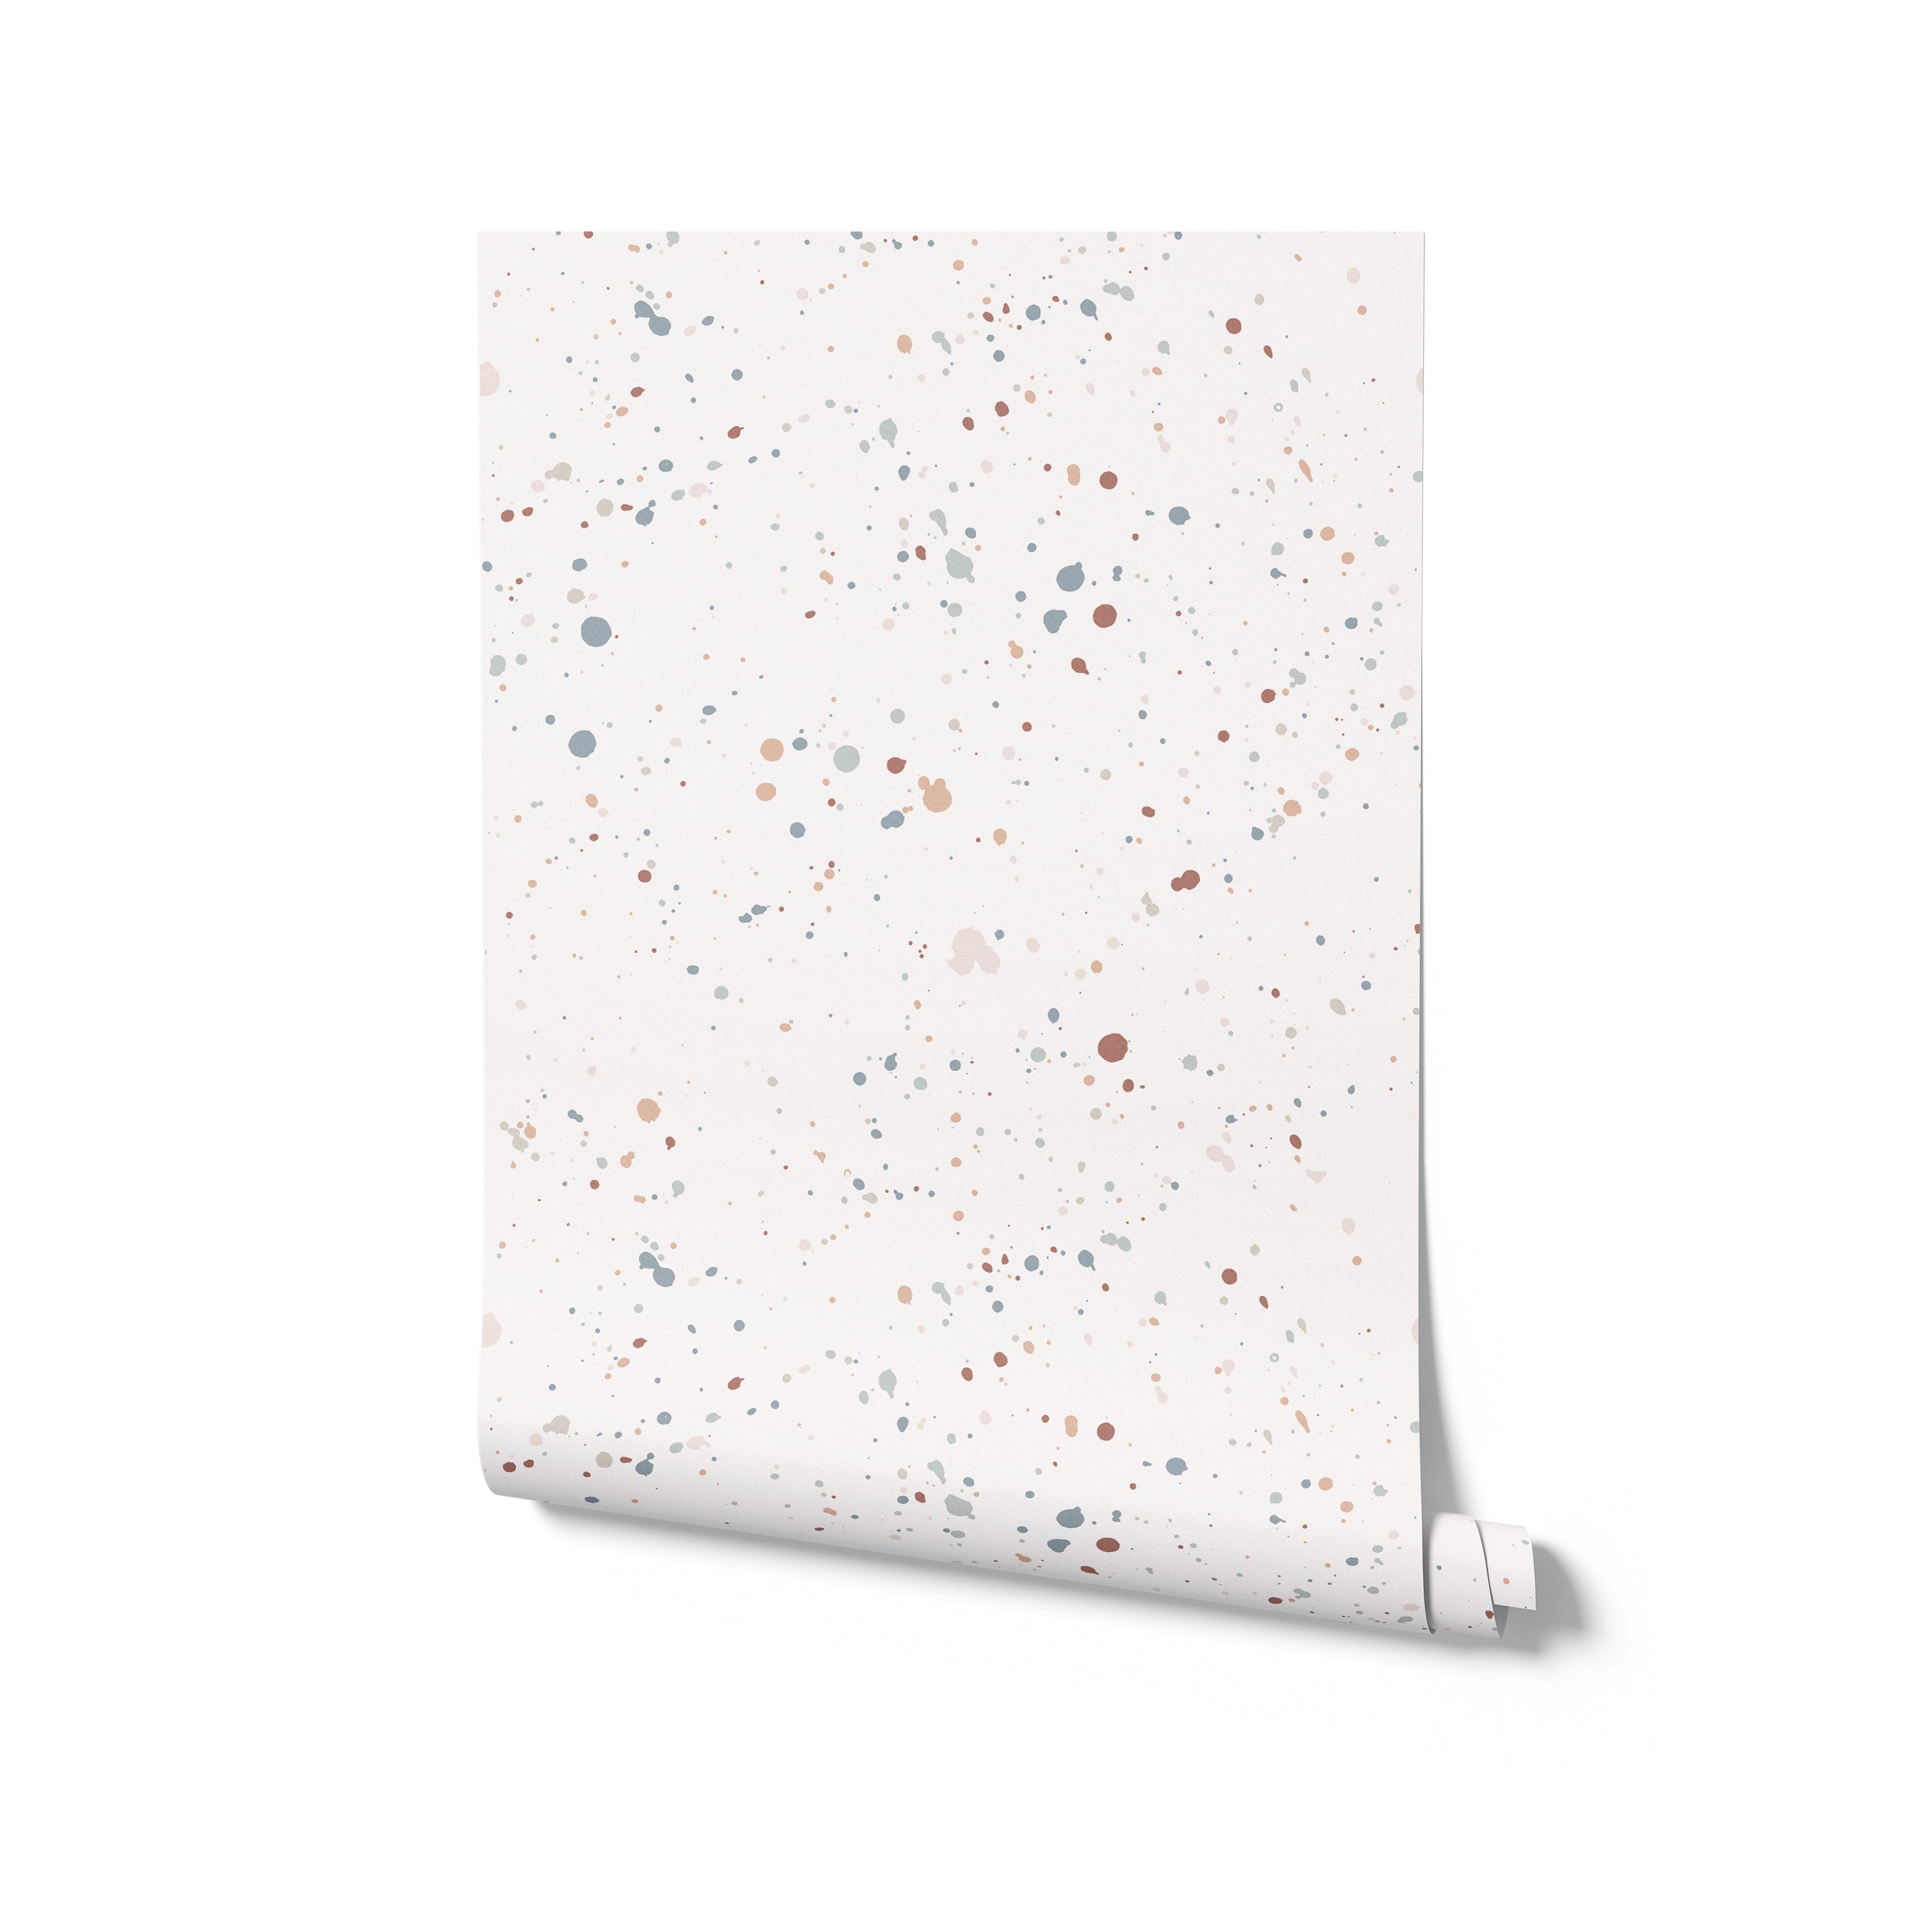 A roll of Ink Spatter Wallpaper unrolled partially to display its unique design. The wallpaper features a white background peppered with colorful ink splatters, offering a spontaneous and modern aesthetic suitable for contemporary spaces.